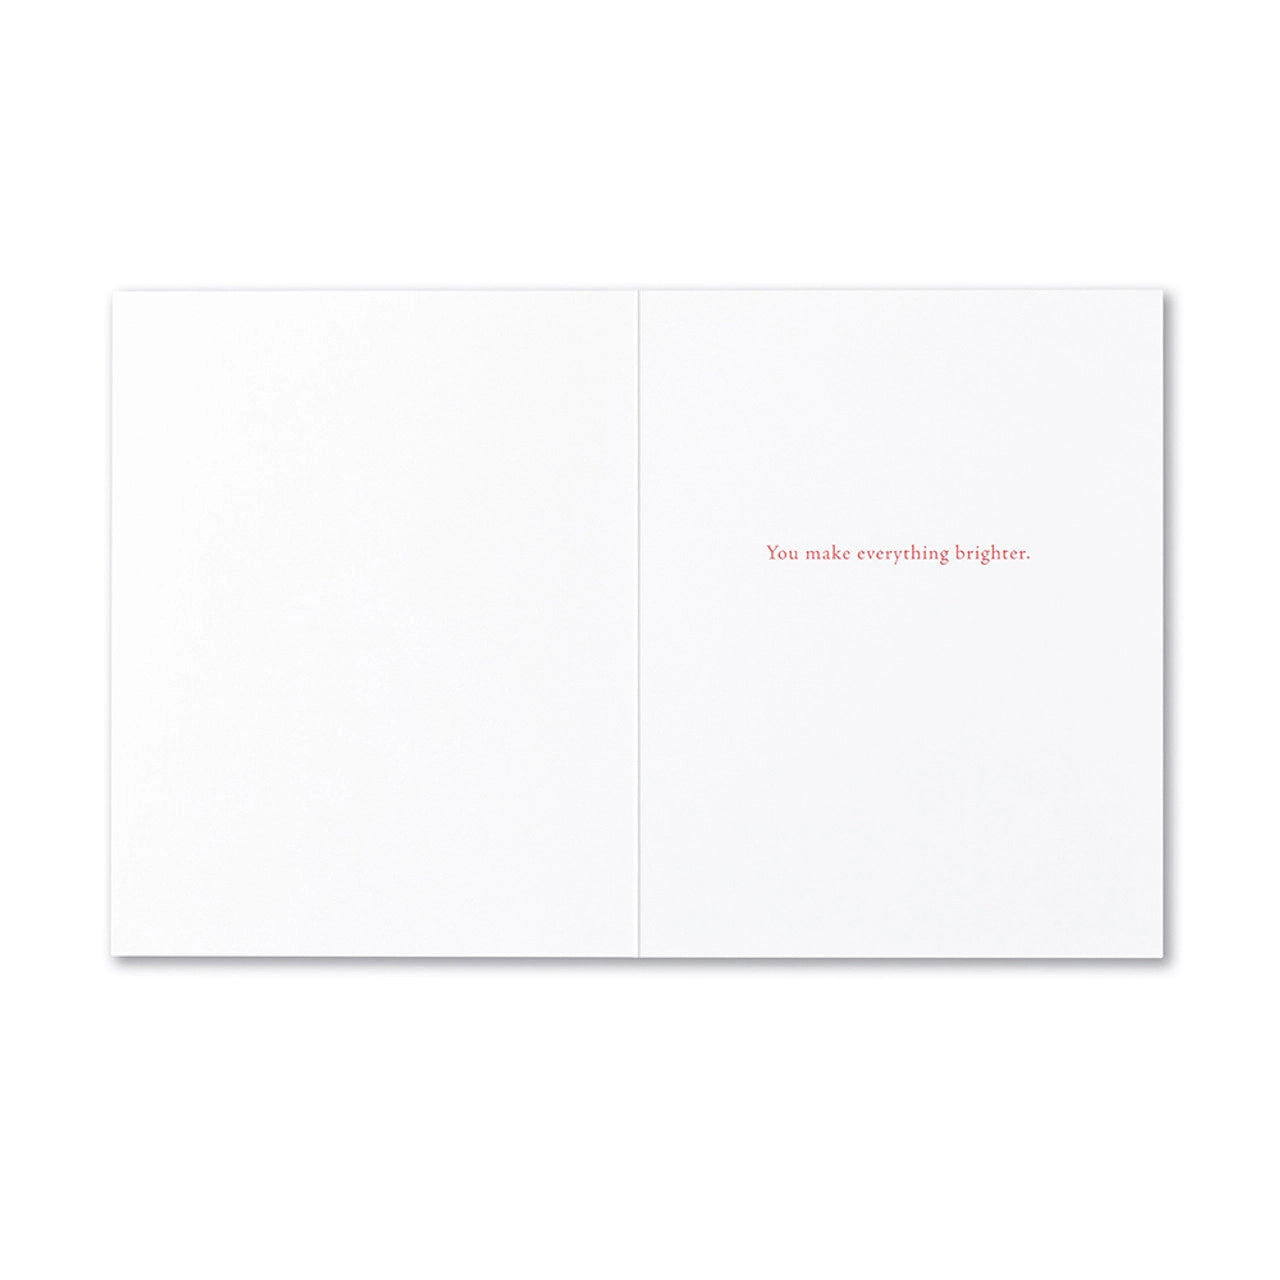 Positively Green Thank You Greeting Card - "Some people are so much sunshine to the square inch." —Walt Whitman - Mellow Monkey